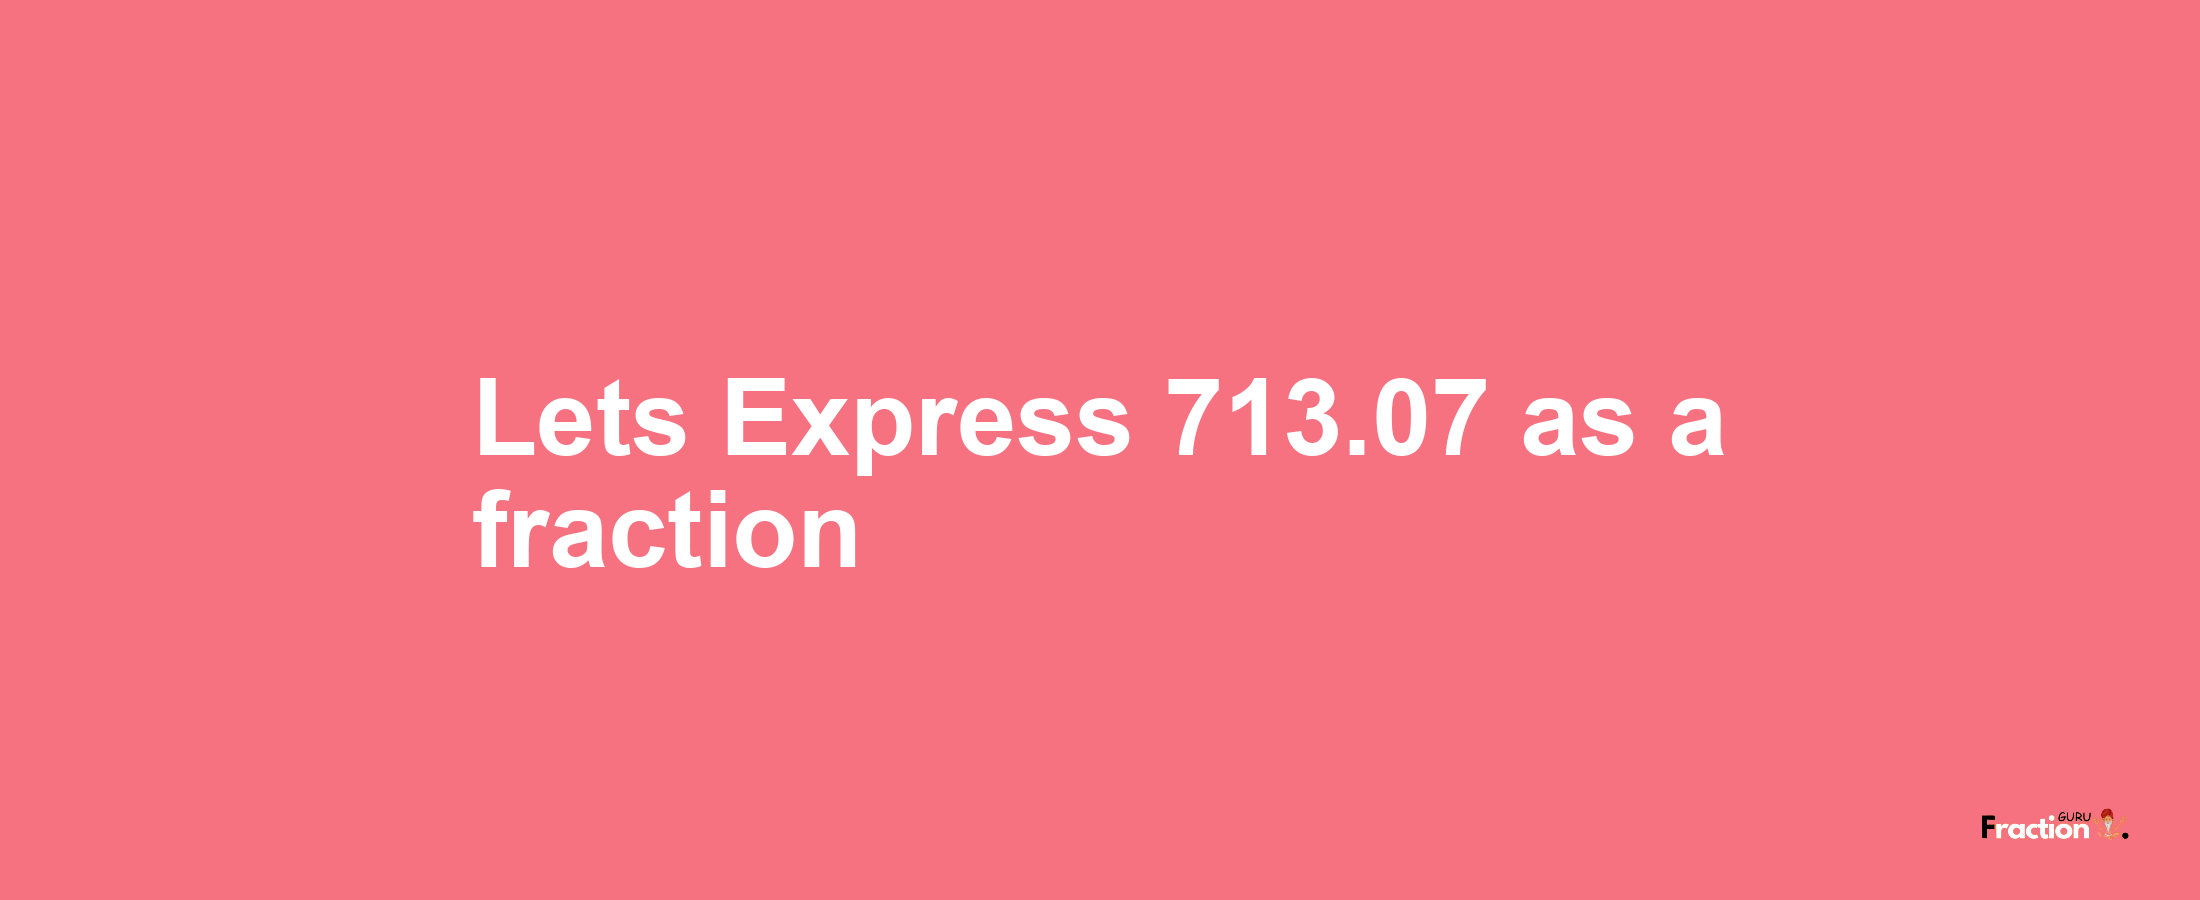 Lets Express 713.07 as afraction